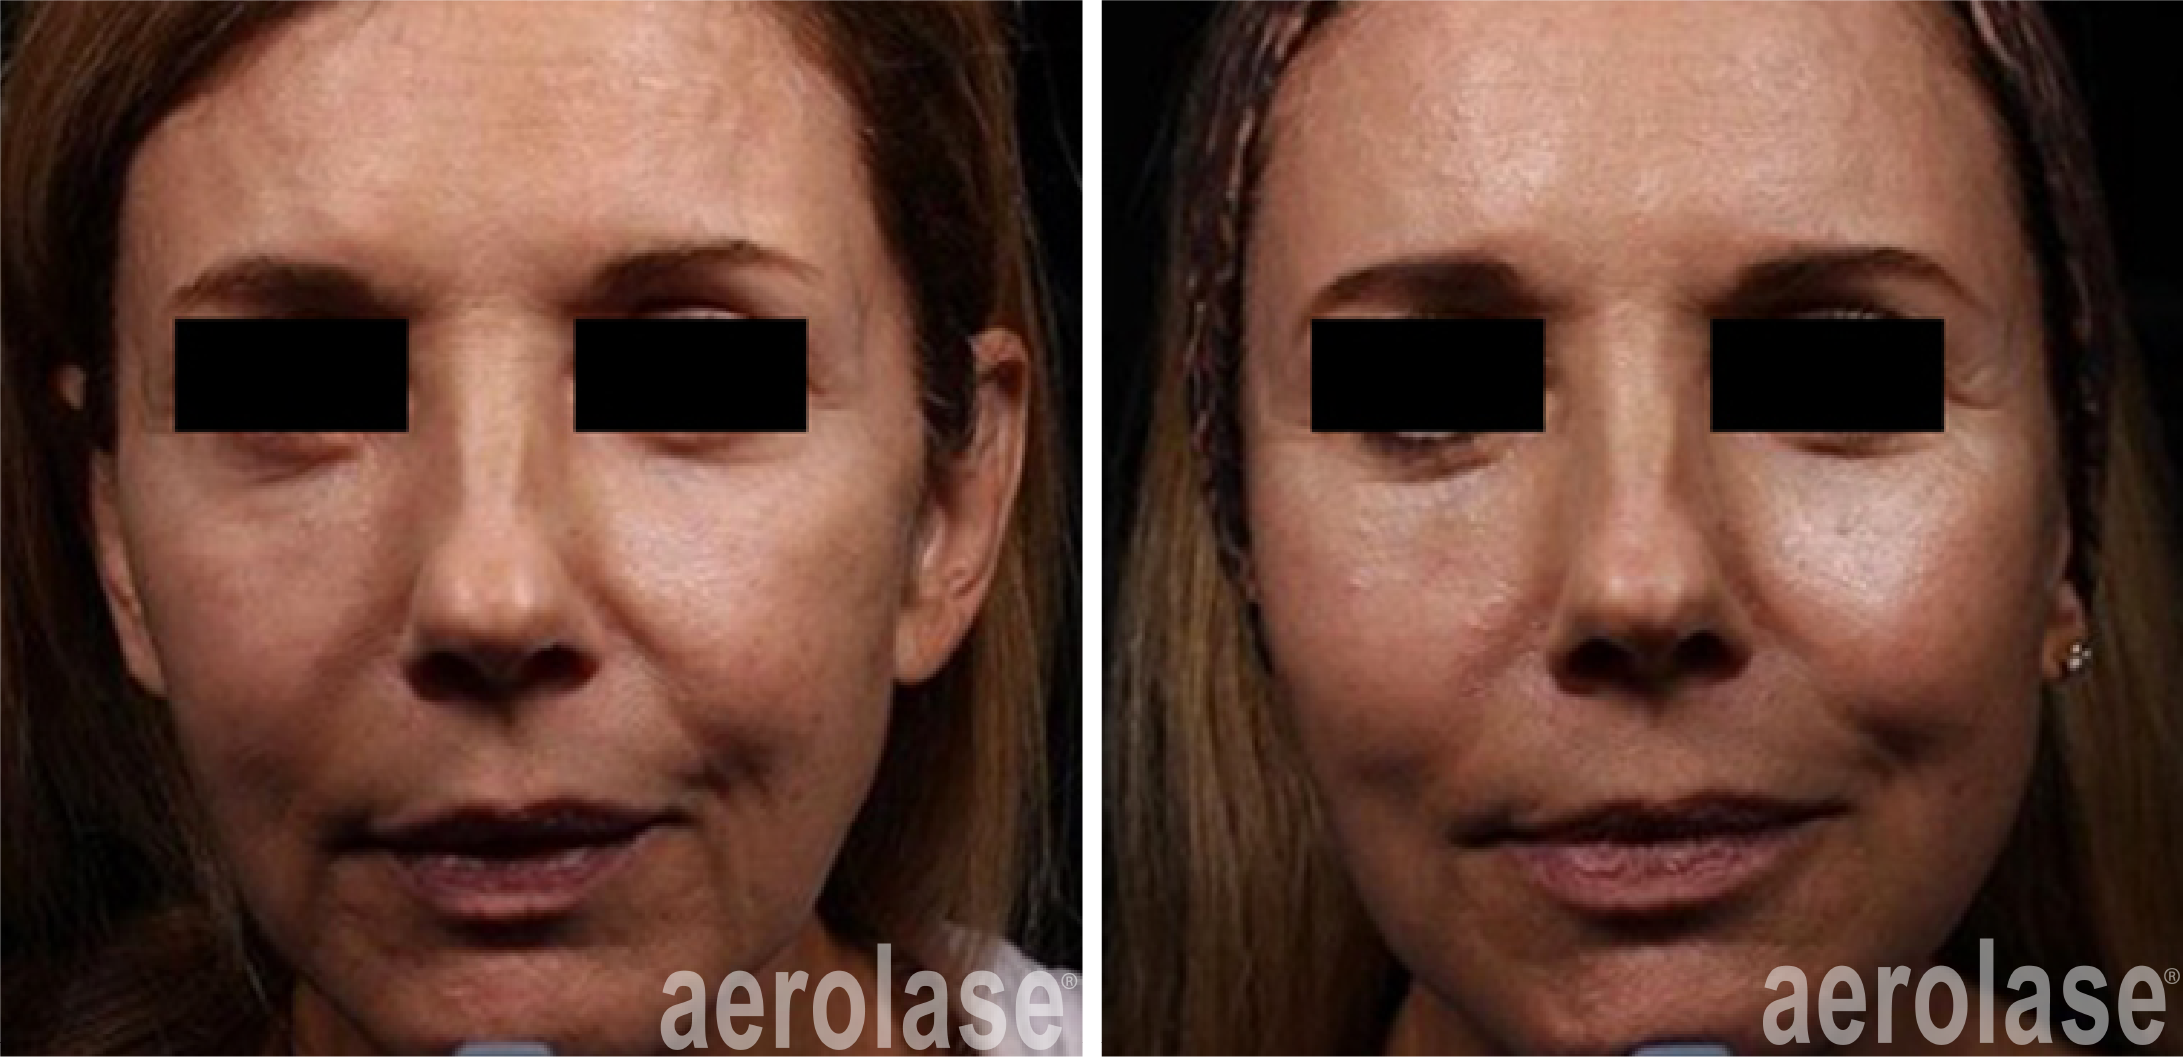 aerolase-neoskin-skin-rejuvenation-after-2-treatments-combined-with-threads-and-filler-one-aesthetics.png